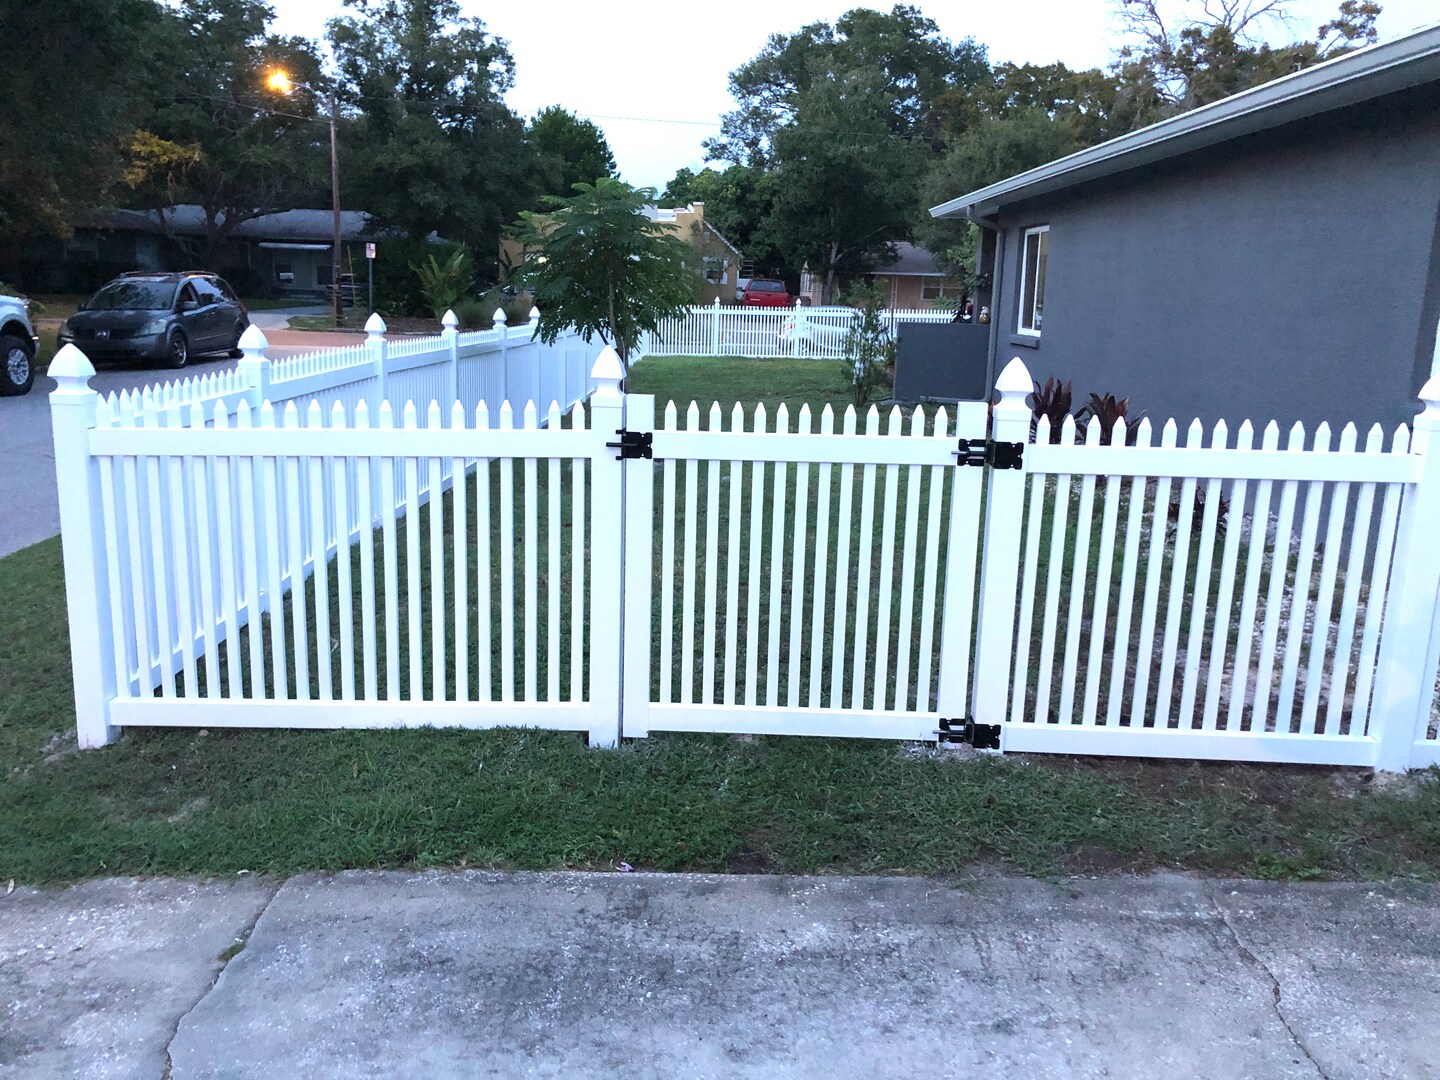 Why You Should Choose JRivers Fence As Your Fence Company